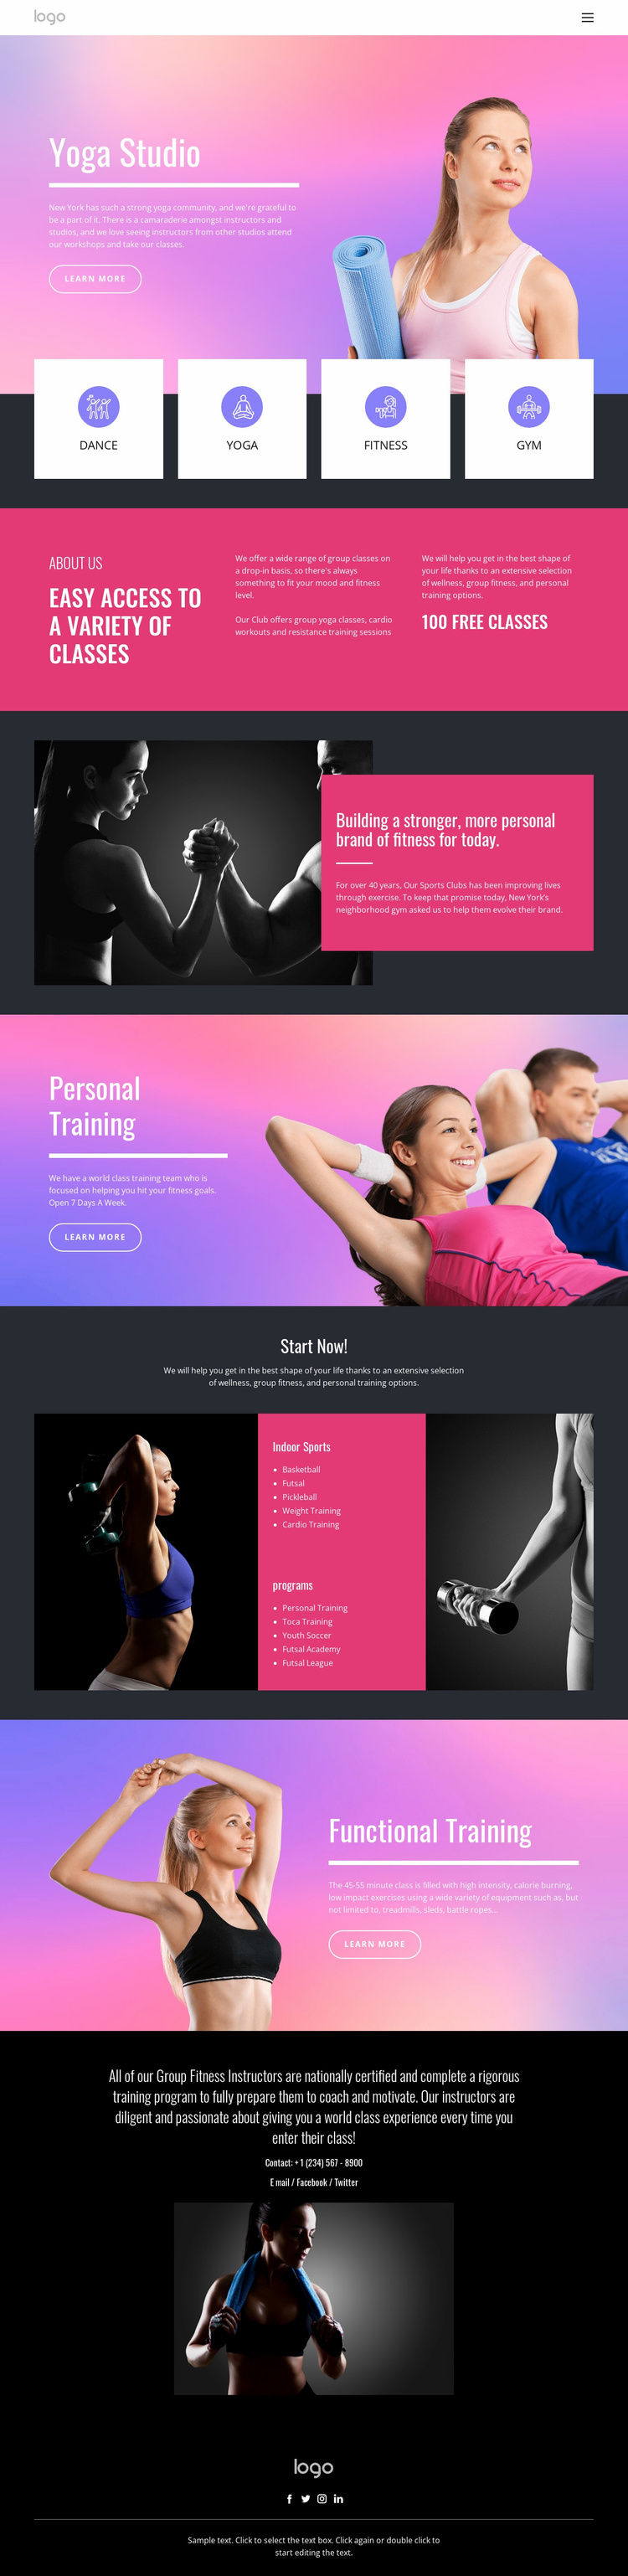 Wellness practice for self-inquiry eCommerce Template